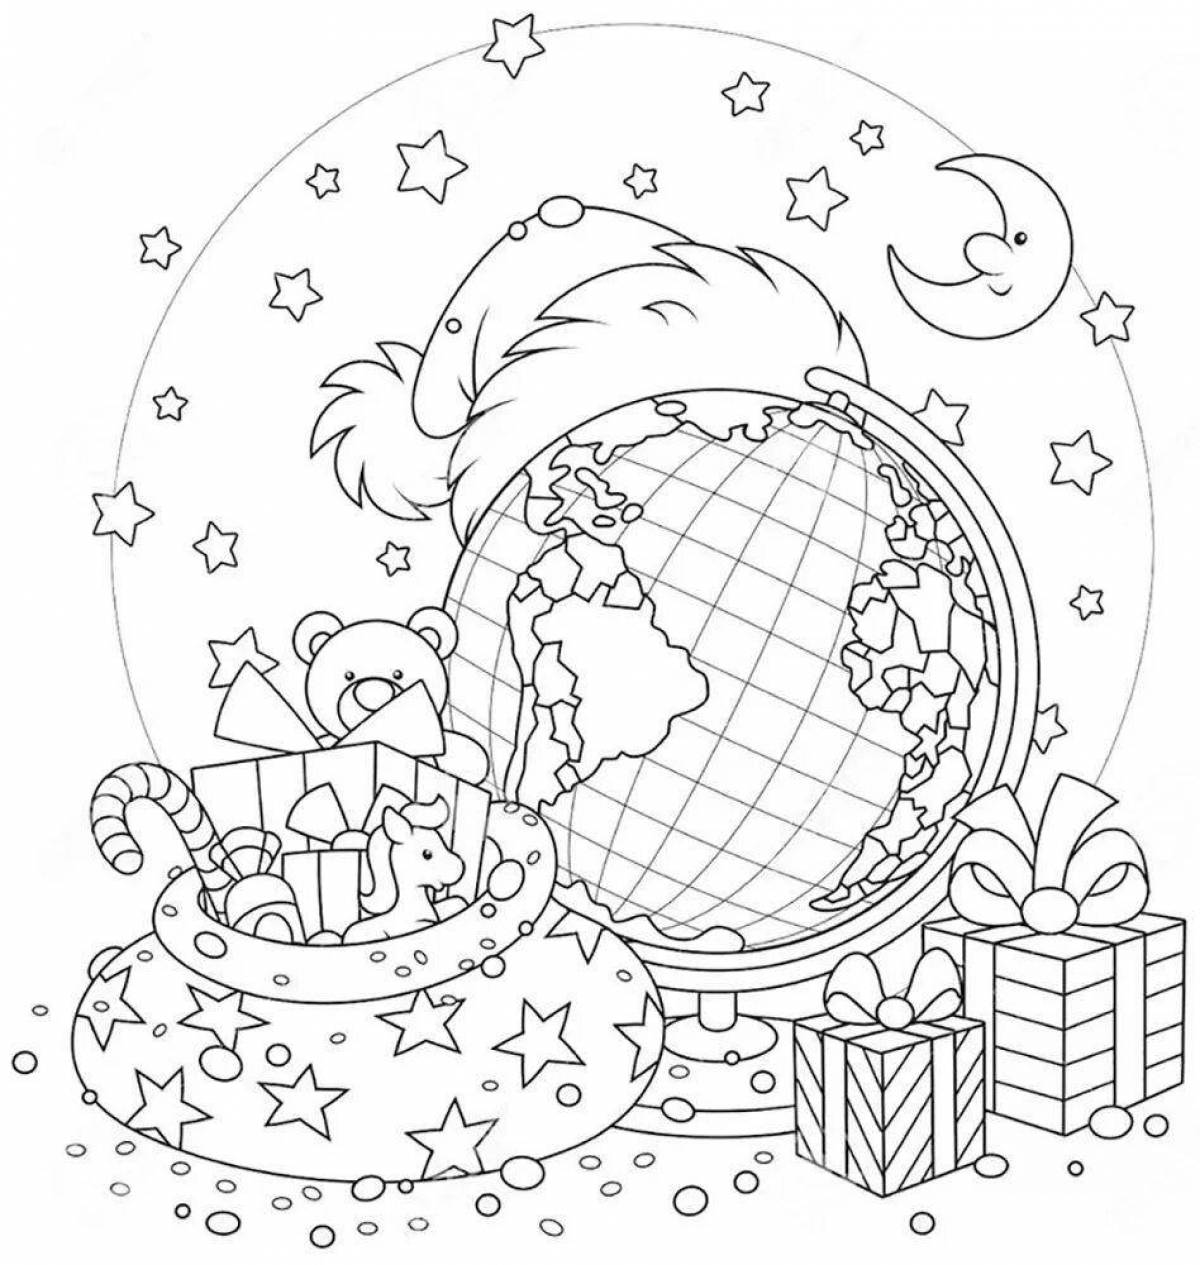 Coloring book bright globe for children 6-7 years old